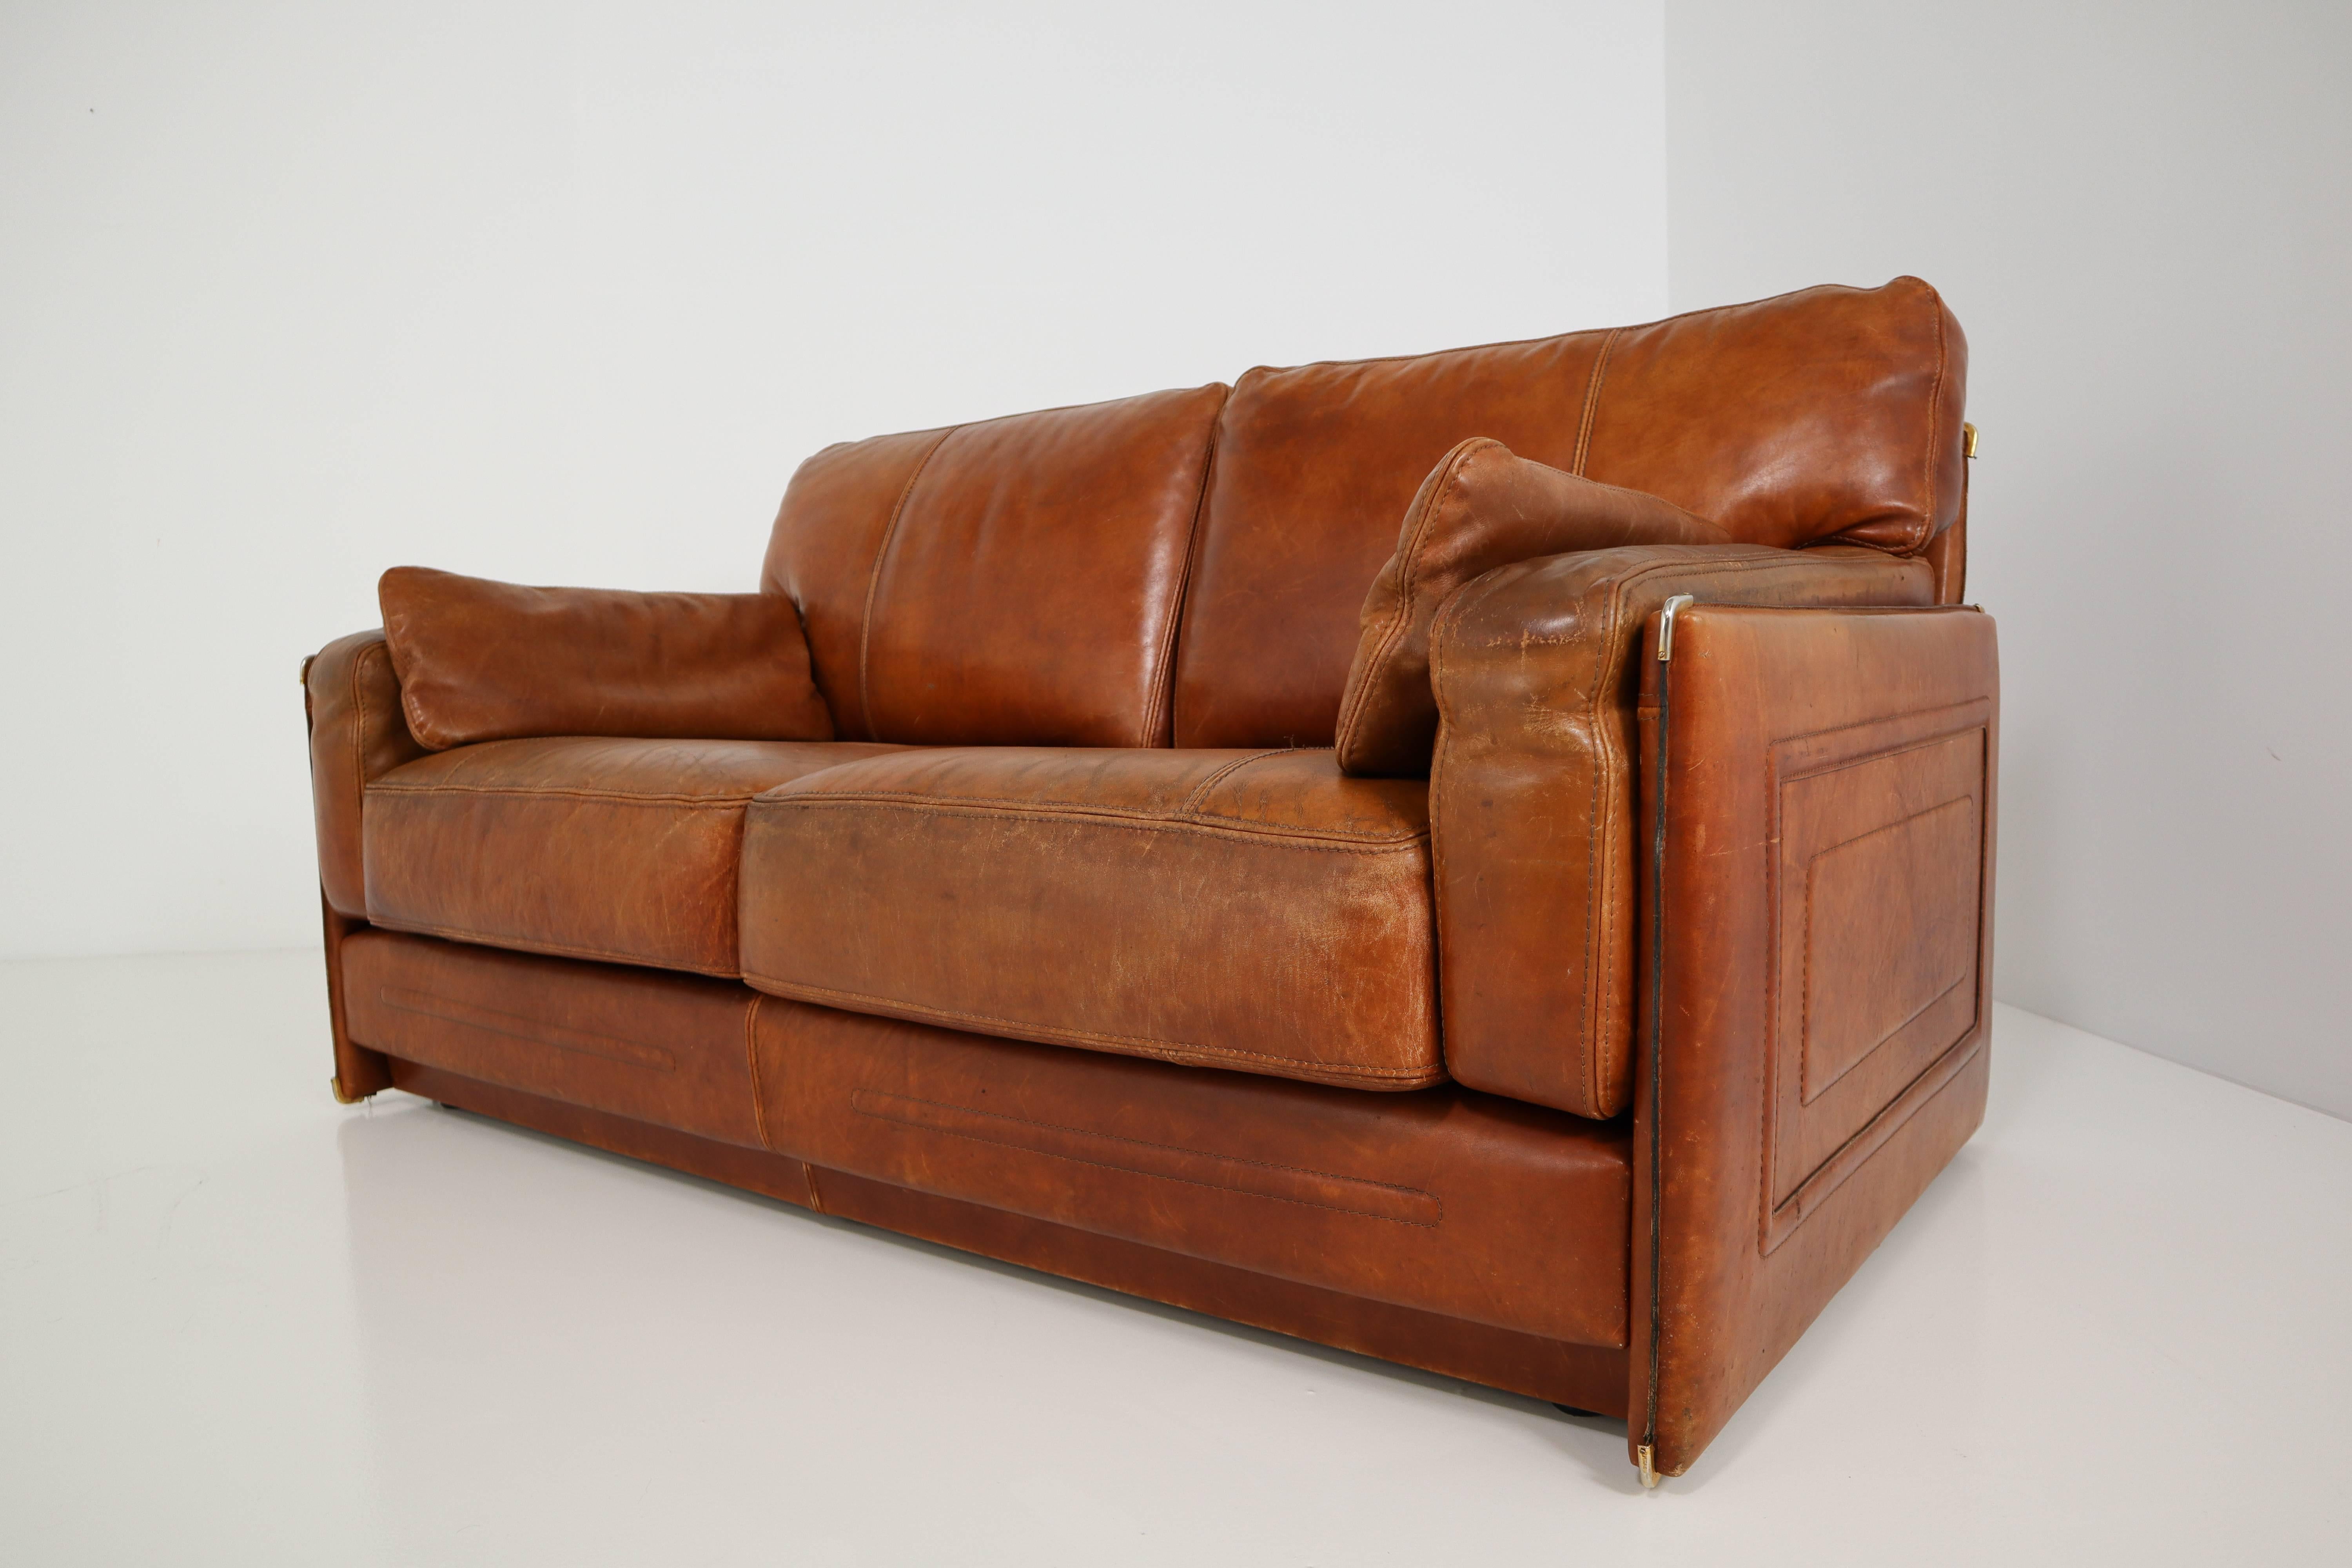 vintage leather sofa second hand